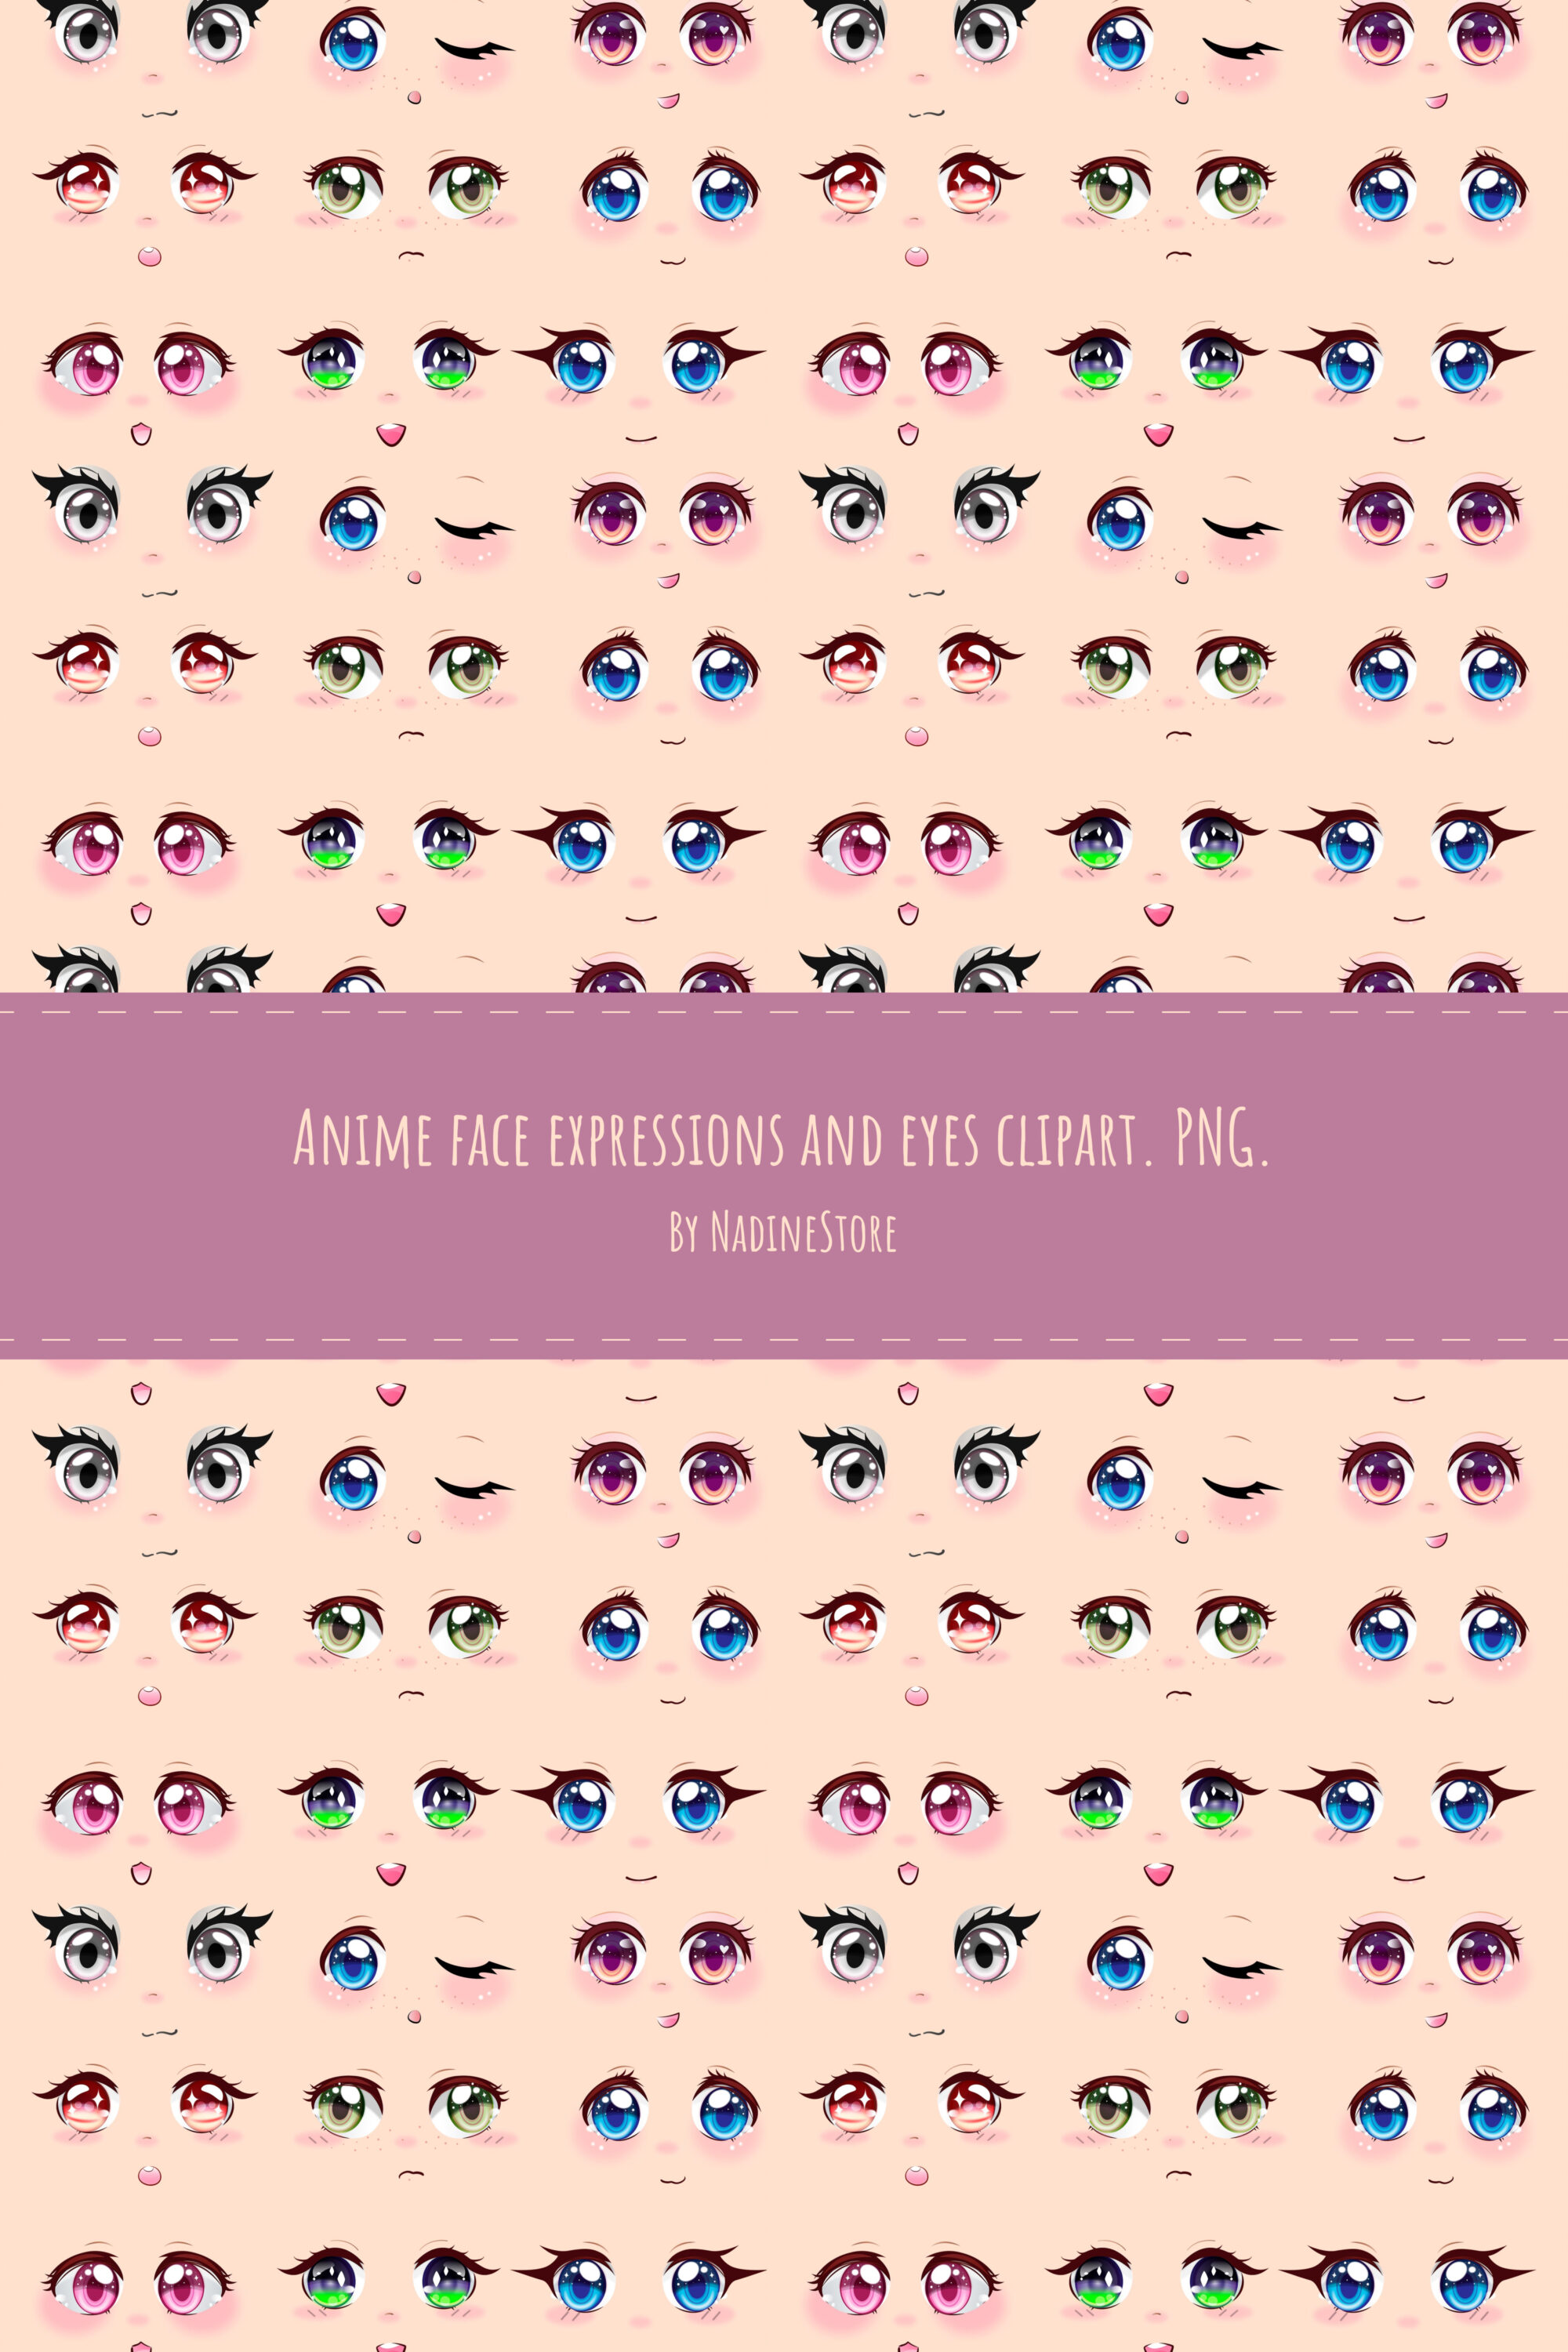 Anime face expressions and eyes clipart of pinterest.